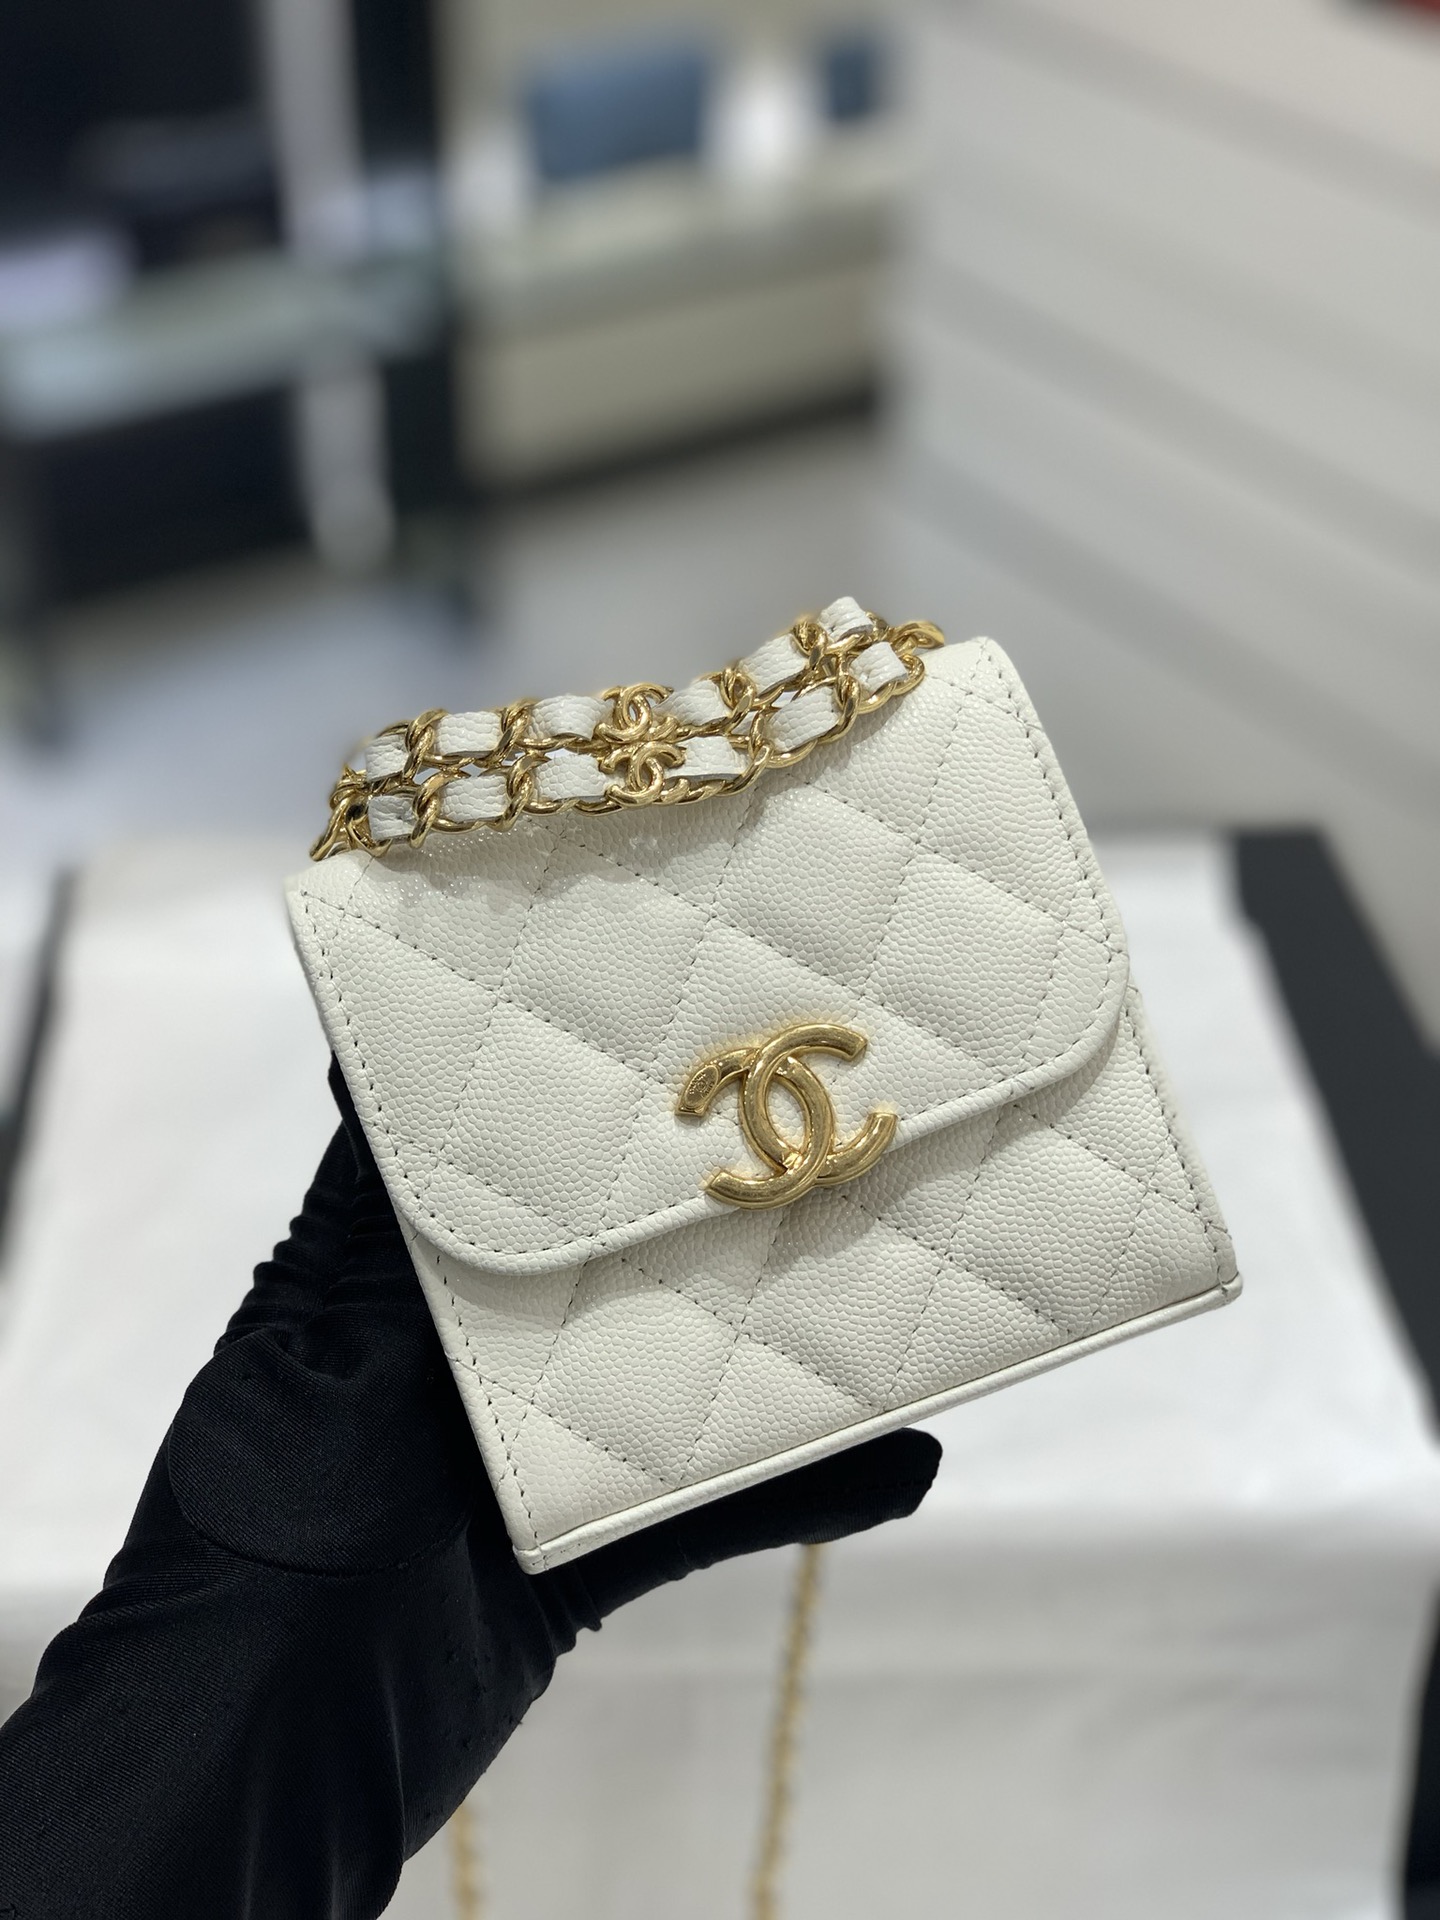 CHANEL Lambskin Quilted Mini Trendy CC Chain Wallet White 624837   FASHIONPHILE